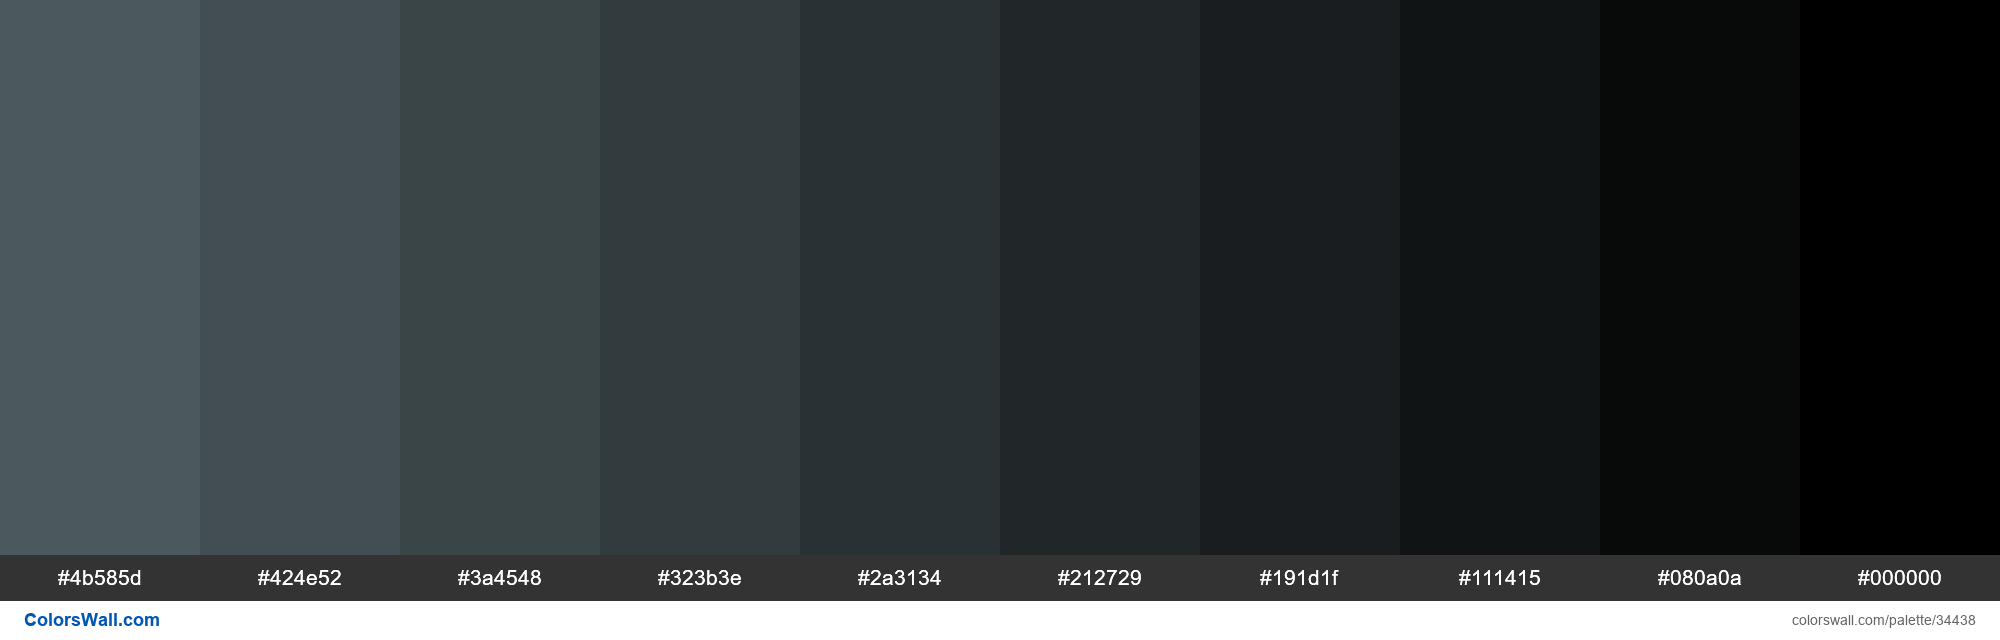 https://colorswall.com/images/palettes/shades-xkcd-color-gunmetal-536267-hex-34438-colorswall.png